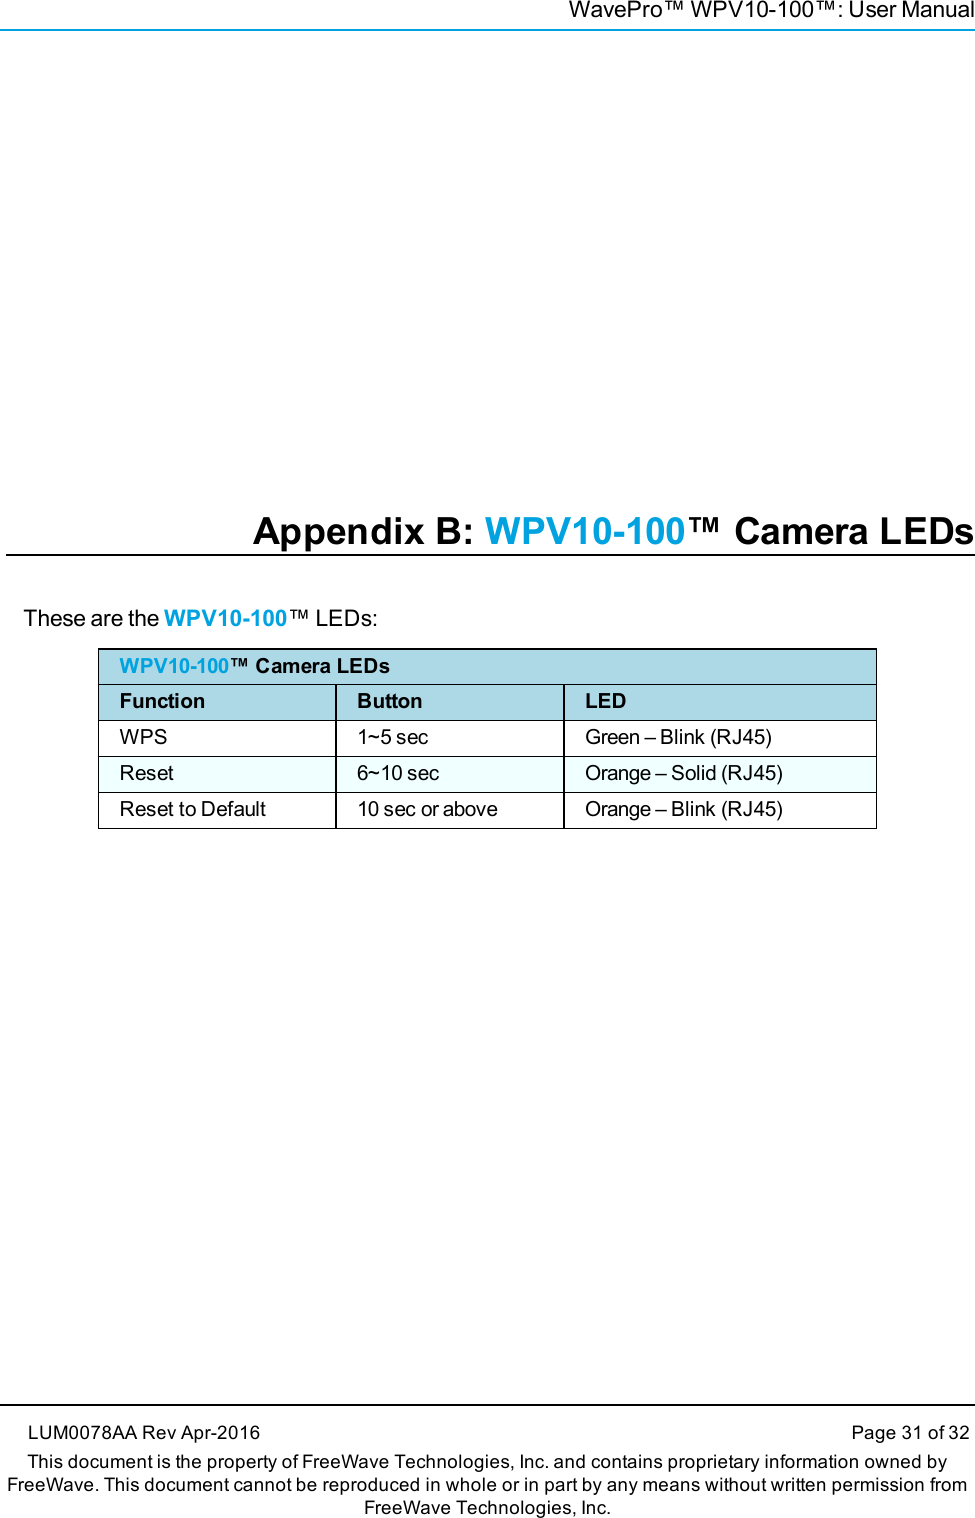 WavePro™ WPV10-100™: User ManualAppendix B: WPV10-100™ Camera LEDsThese are the WPV10-100™ LEDs:WPV10-100™ Camera LEDsFunction Button LEDWPS 1~5 sec Green – Blink (RJ45)Reset 6~10 sec Orange – Solid (RJ45)Reset to Default 10 sec or above Orange – Blink (RJ45)LUM0078AA Rev Apr-2016 Page 31 of 32This document is the property of FreeWave Technologies, Inc. and contains proprietary information owned byFreeWave. This document cannot be reproduced in whole or in part by any means without written permission fromFreeWave Technologies, Inc.